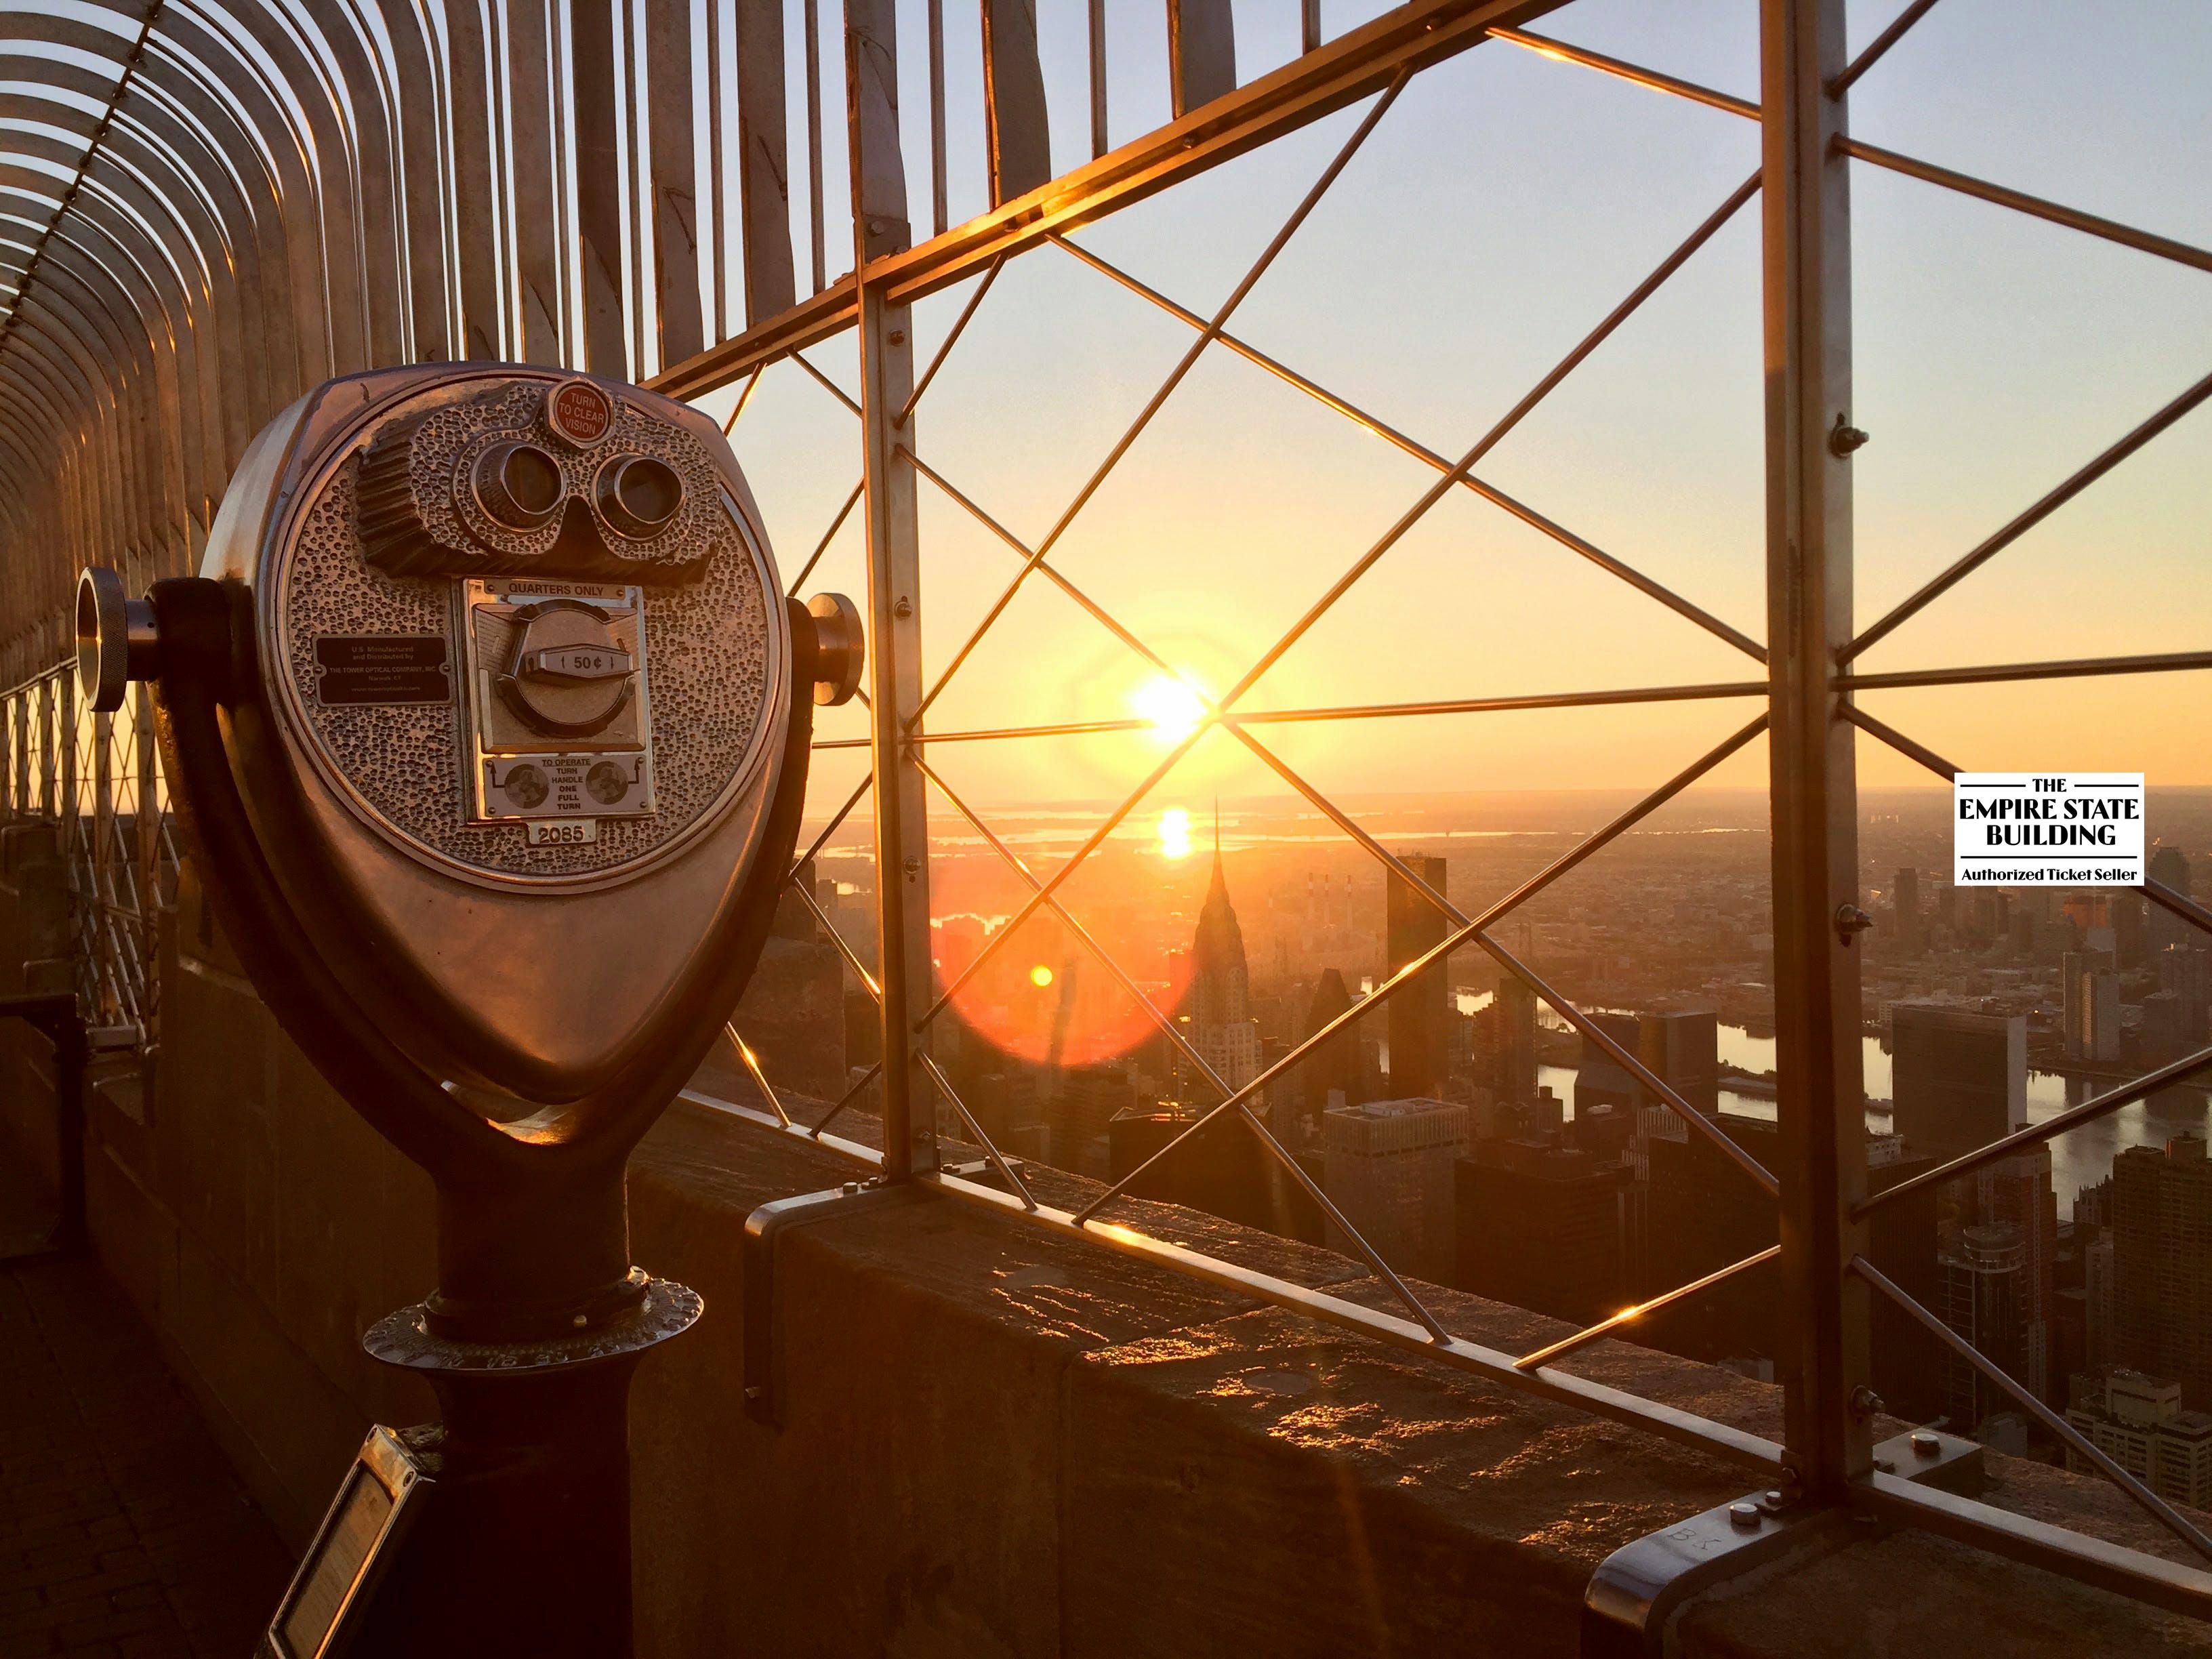 Tickets to the Empire State Building Observatory at Sunrise Musement